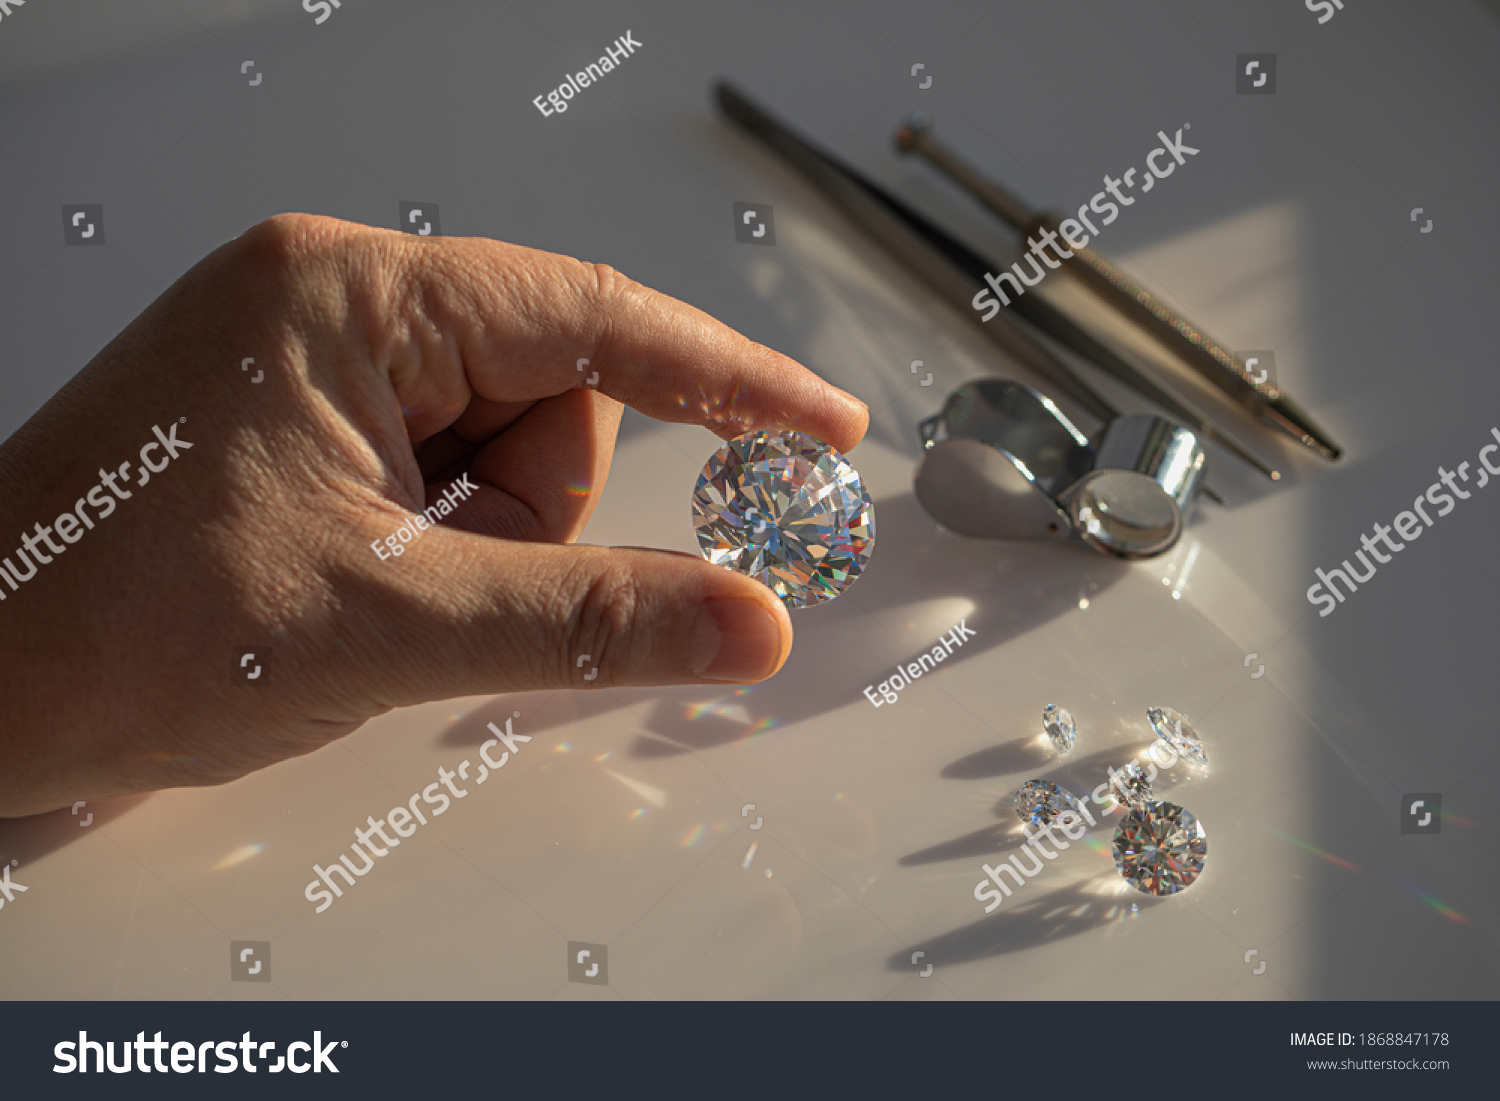 Close-up of the hand of jeweller gemologist with large size round cut diamond on desktop with magnifier and tweezers. Buyer diamond expert checking color of diamond in natural light. #1868847178